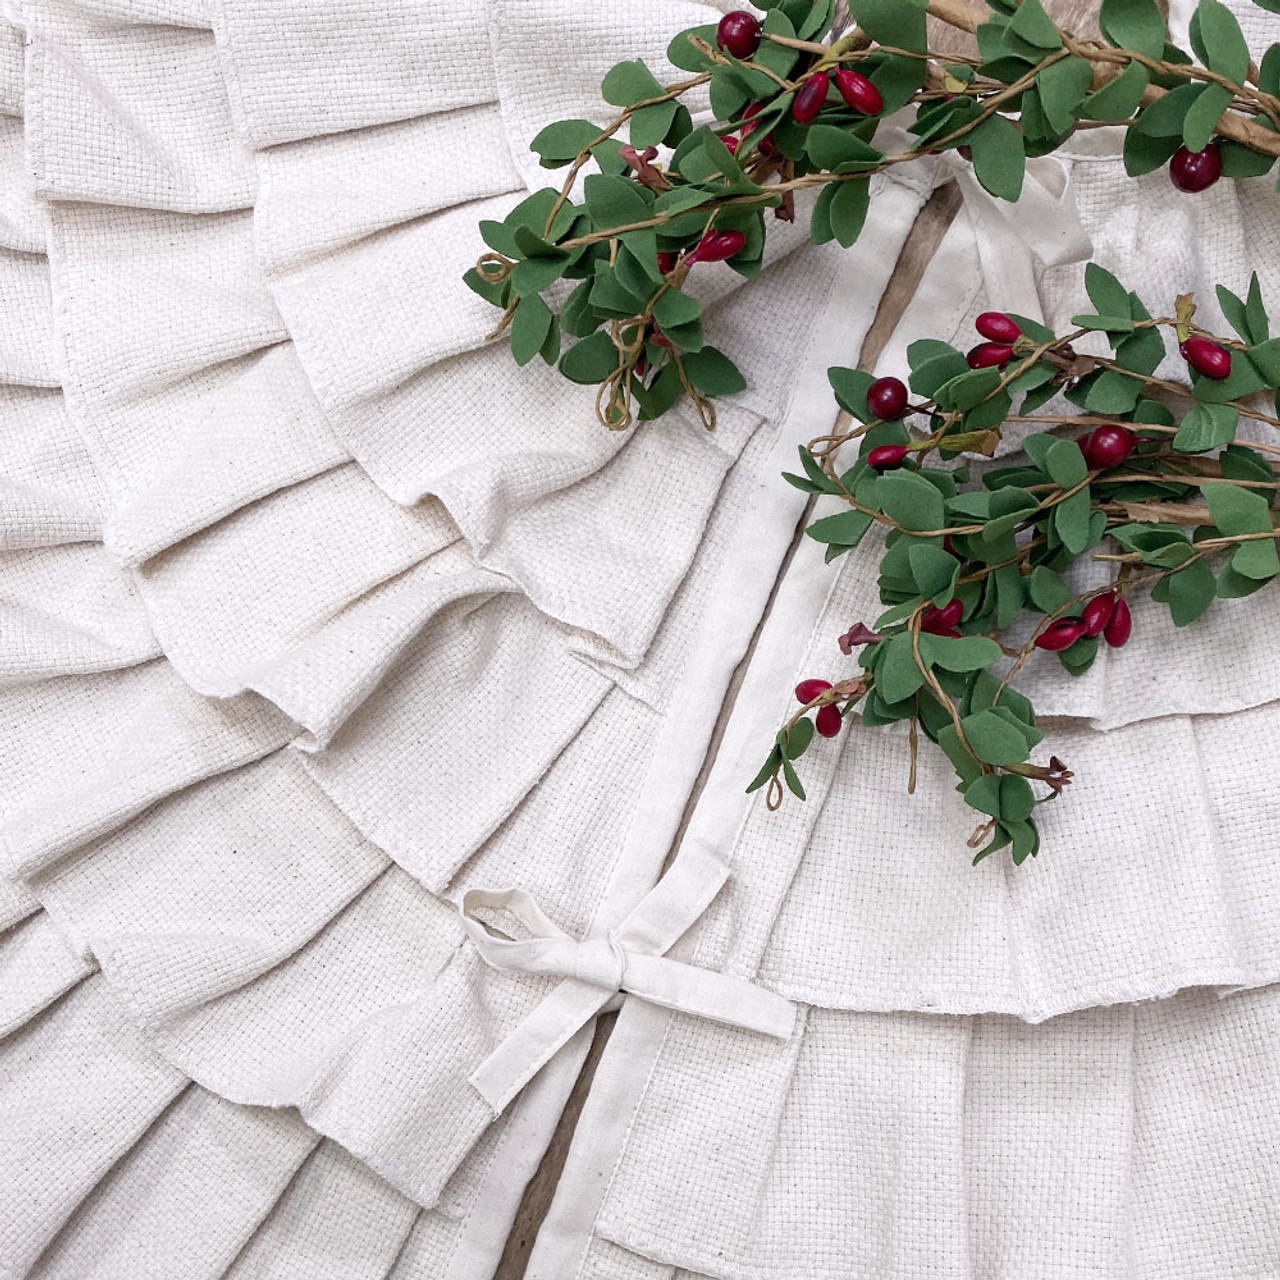 48" Ruffled Shabby Natural White Cotton Christmas Tree Skirt by Marilee Home